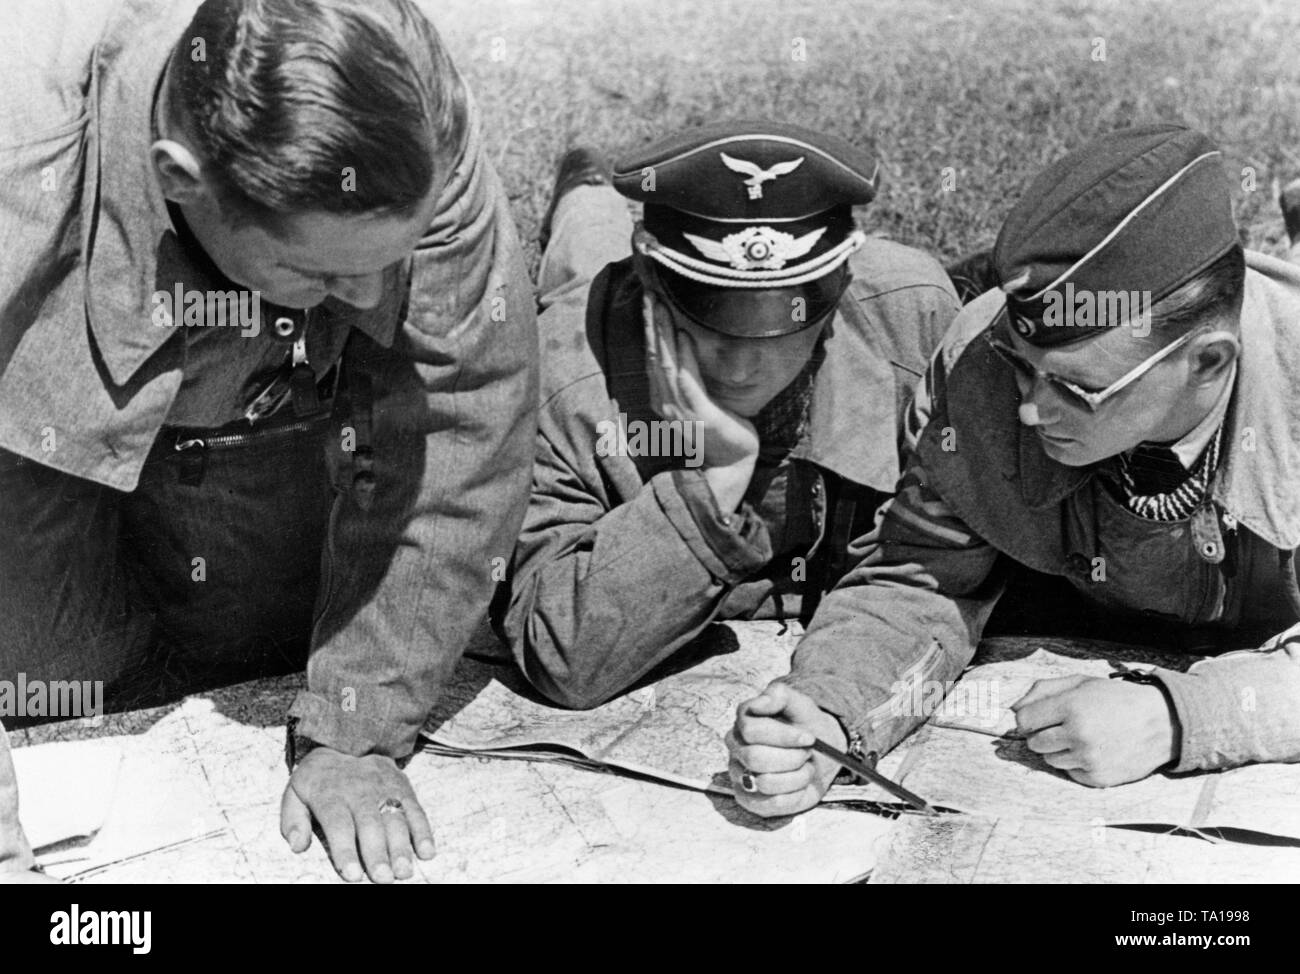 Officers of the Luftwaffe discuss Luftwaffe deployments before the beginning of the Battle of France on May 10, 1940. The Luftwaffe succeeded in destroying the majority of the French air force on the ground already on the first day of the Battle of France. Photo: war correspondent Spieth. Stock Photo